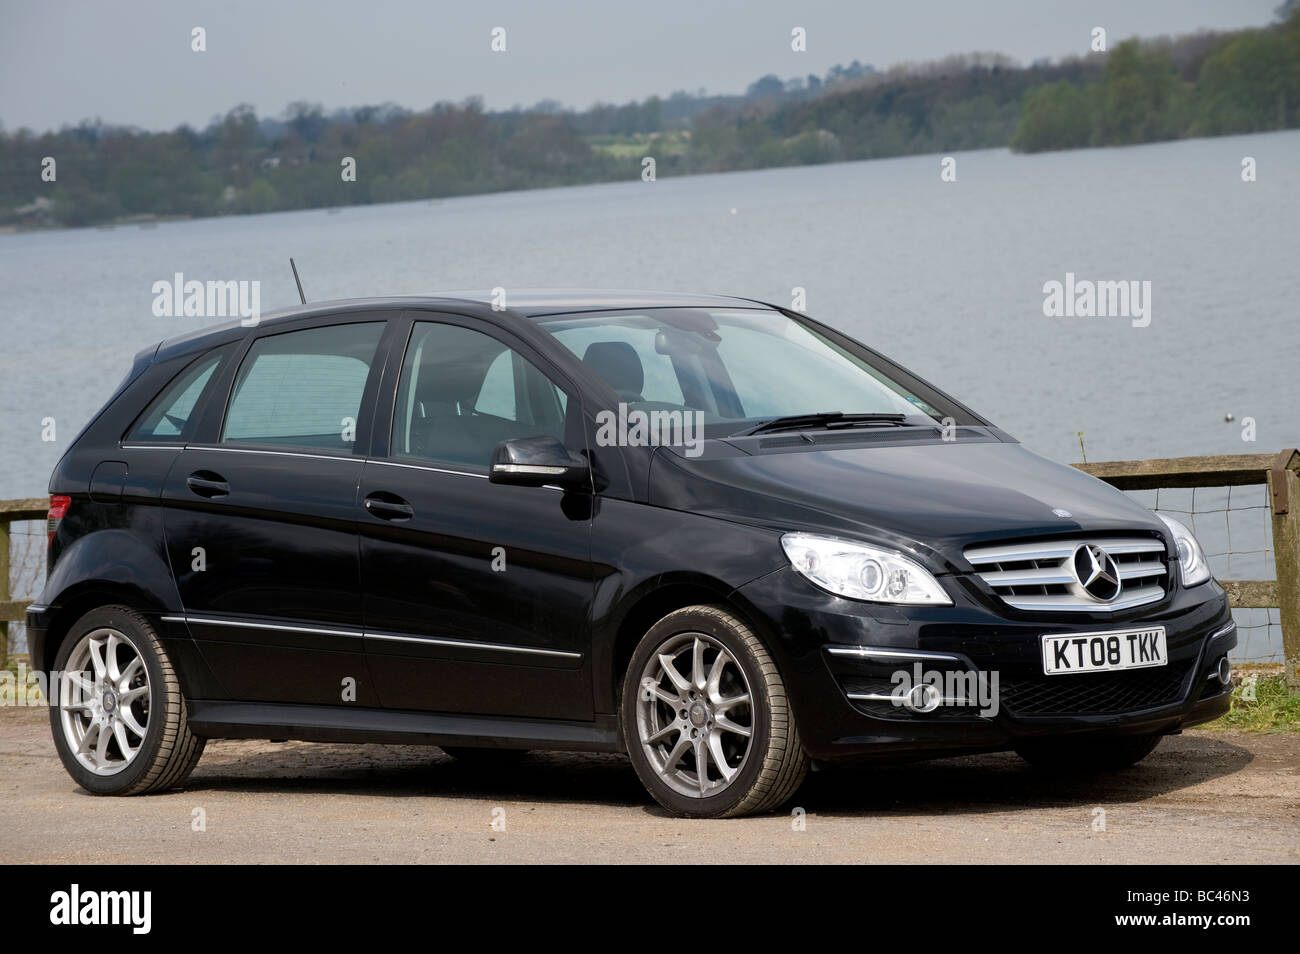 Black 2008 Mercedes Benz B200 CDI hatchback car parked at the side of the  road in Derbyshire England Stock Photo - Alamy